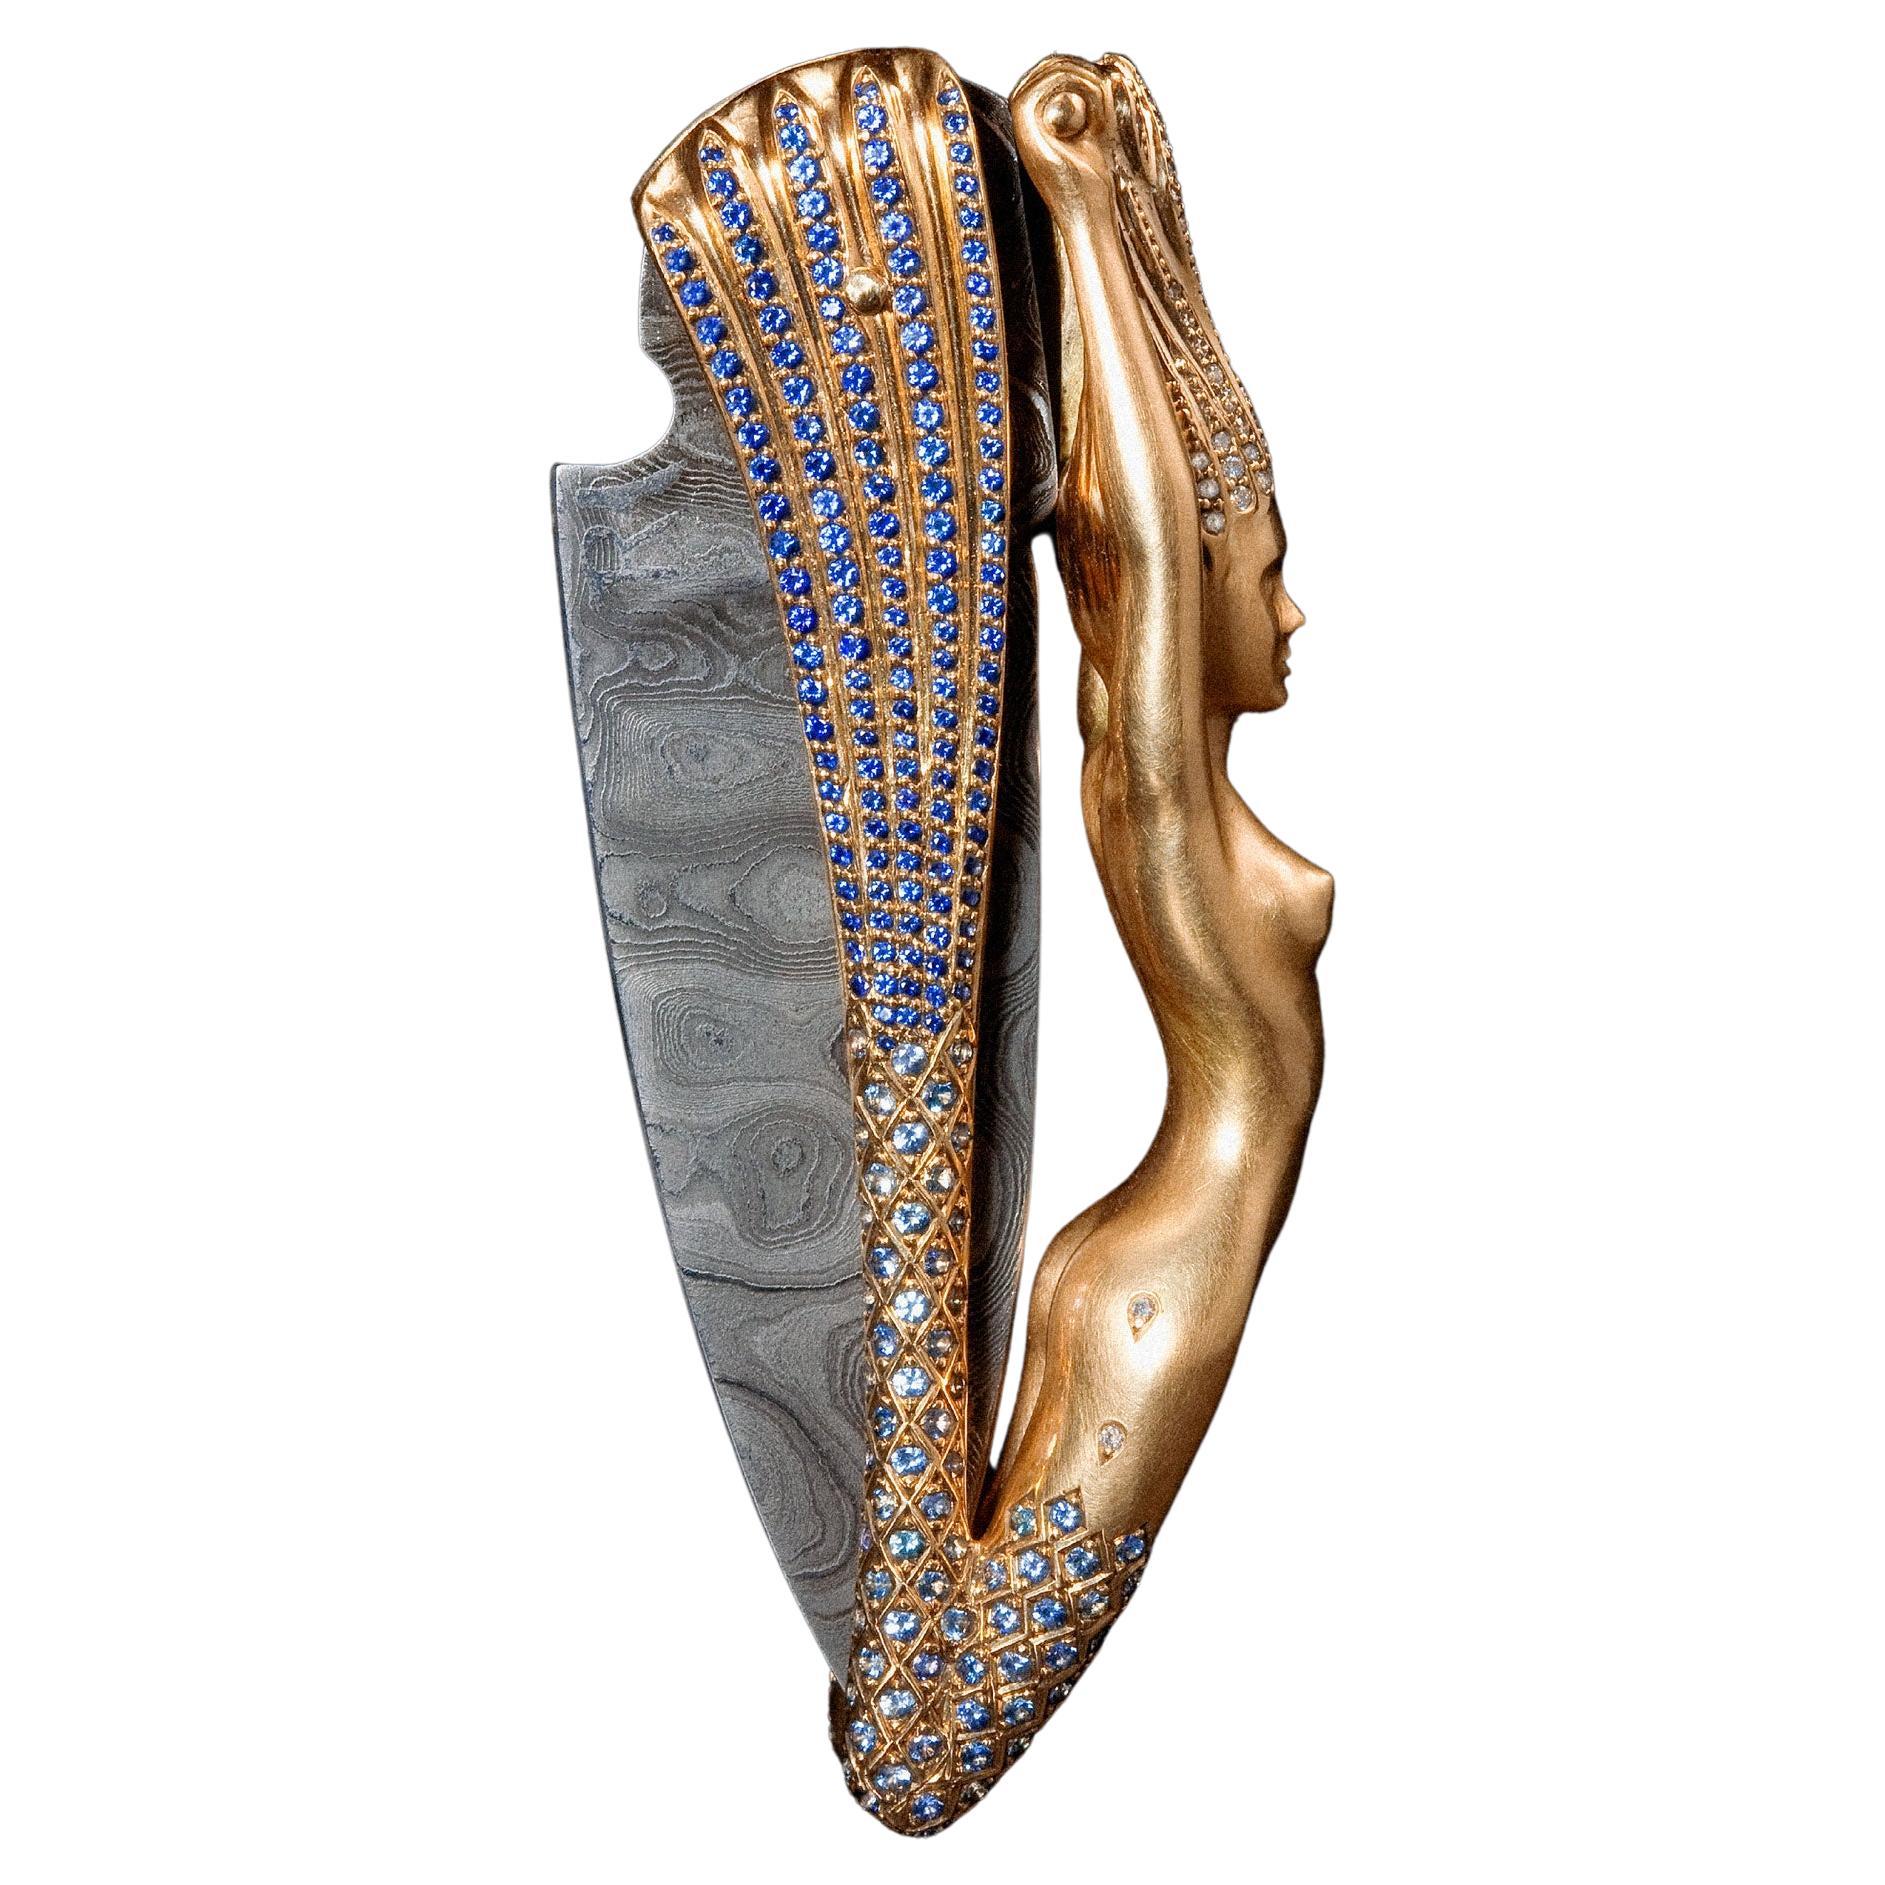 Sculptural Handcrafted Mermaid Knife, 18k Rose Gold, Layered Damast, Diamonds